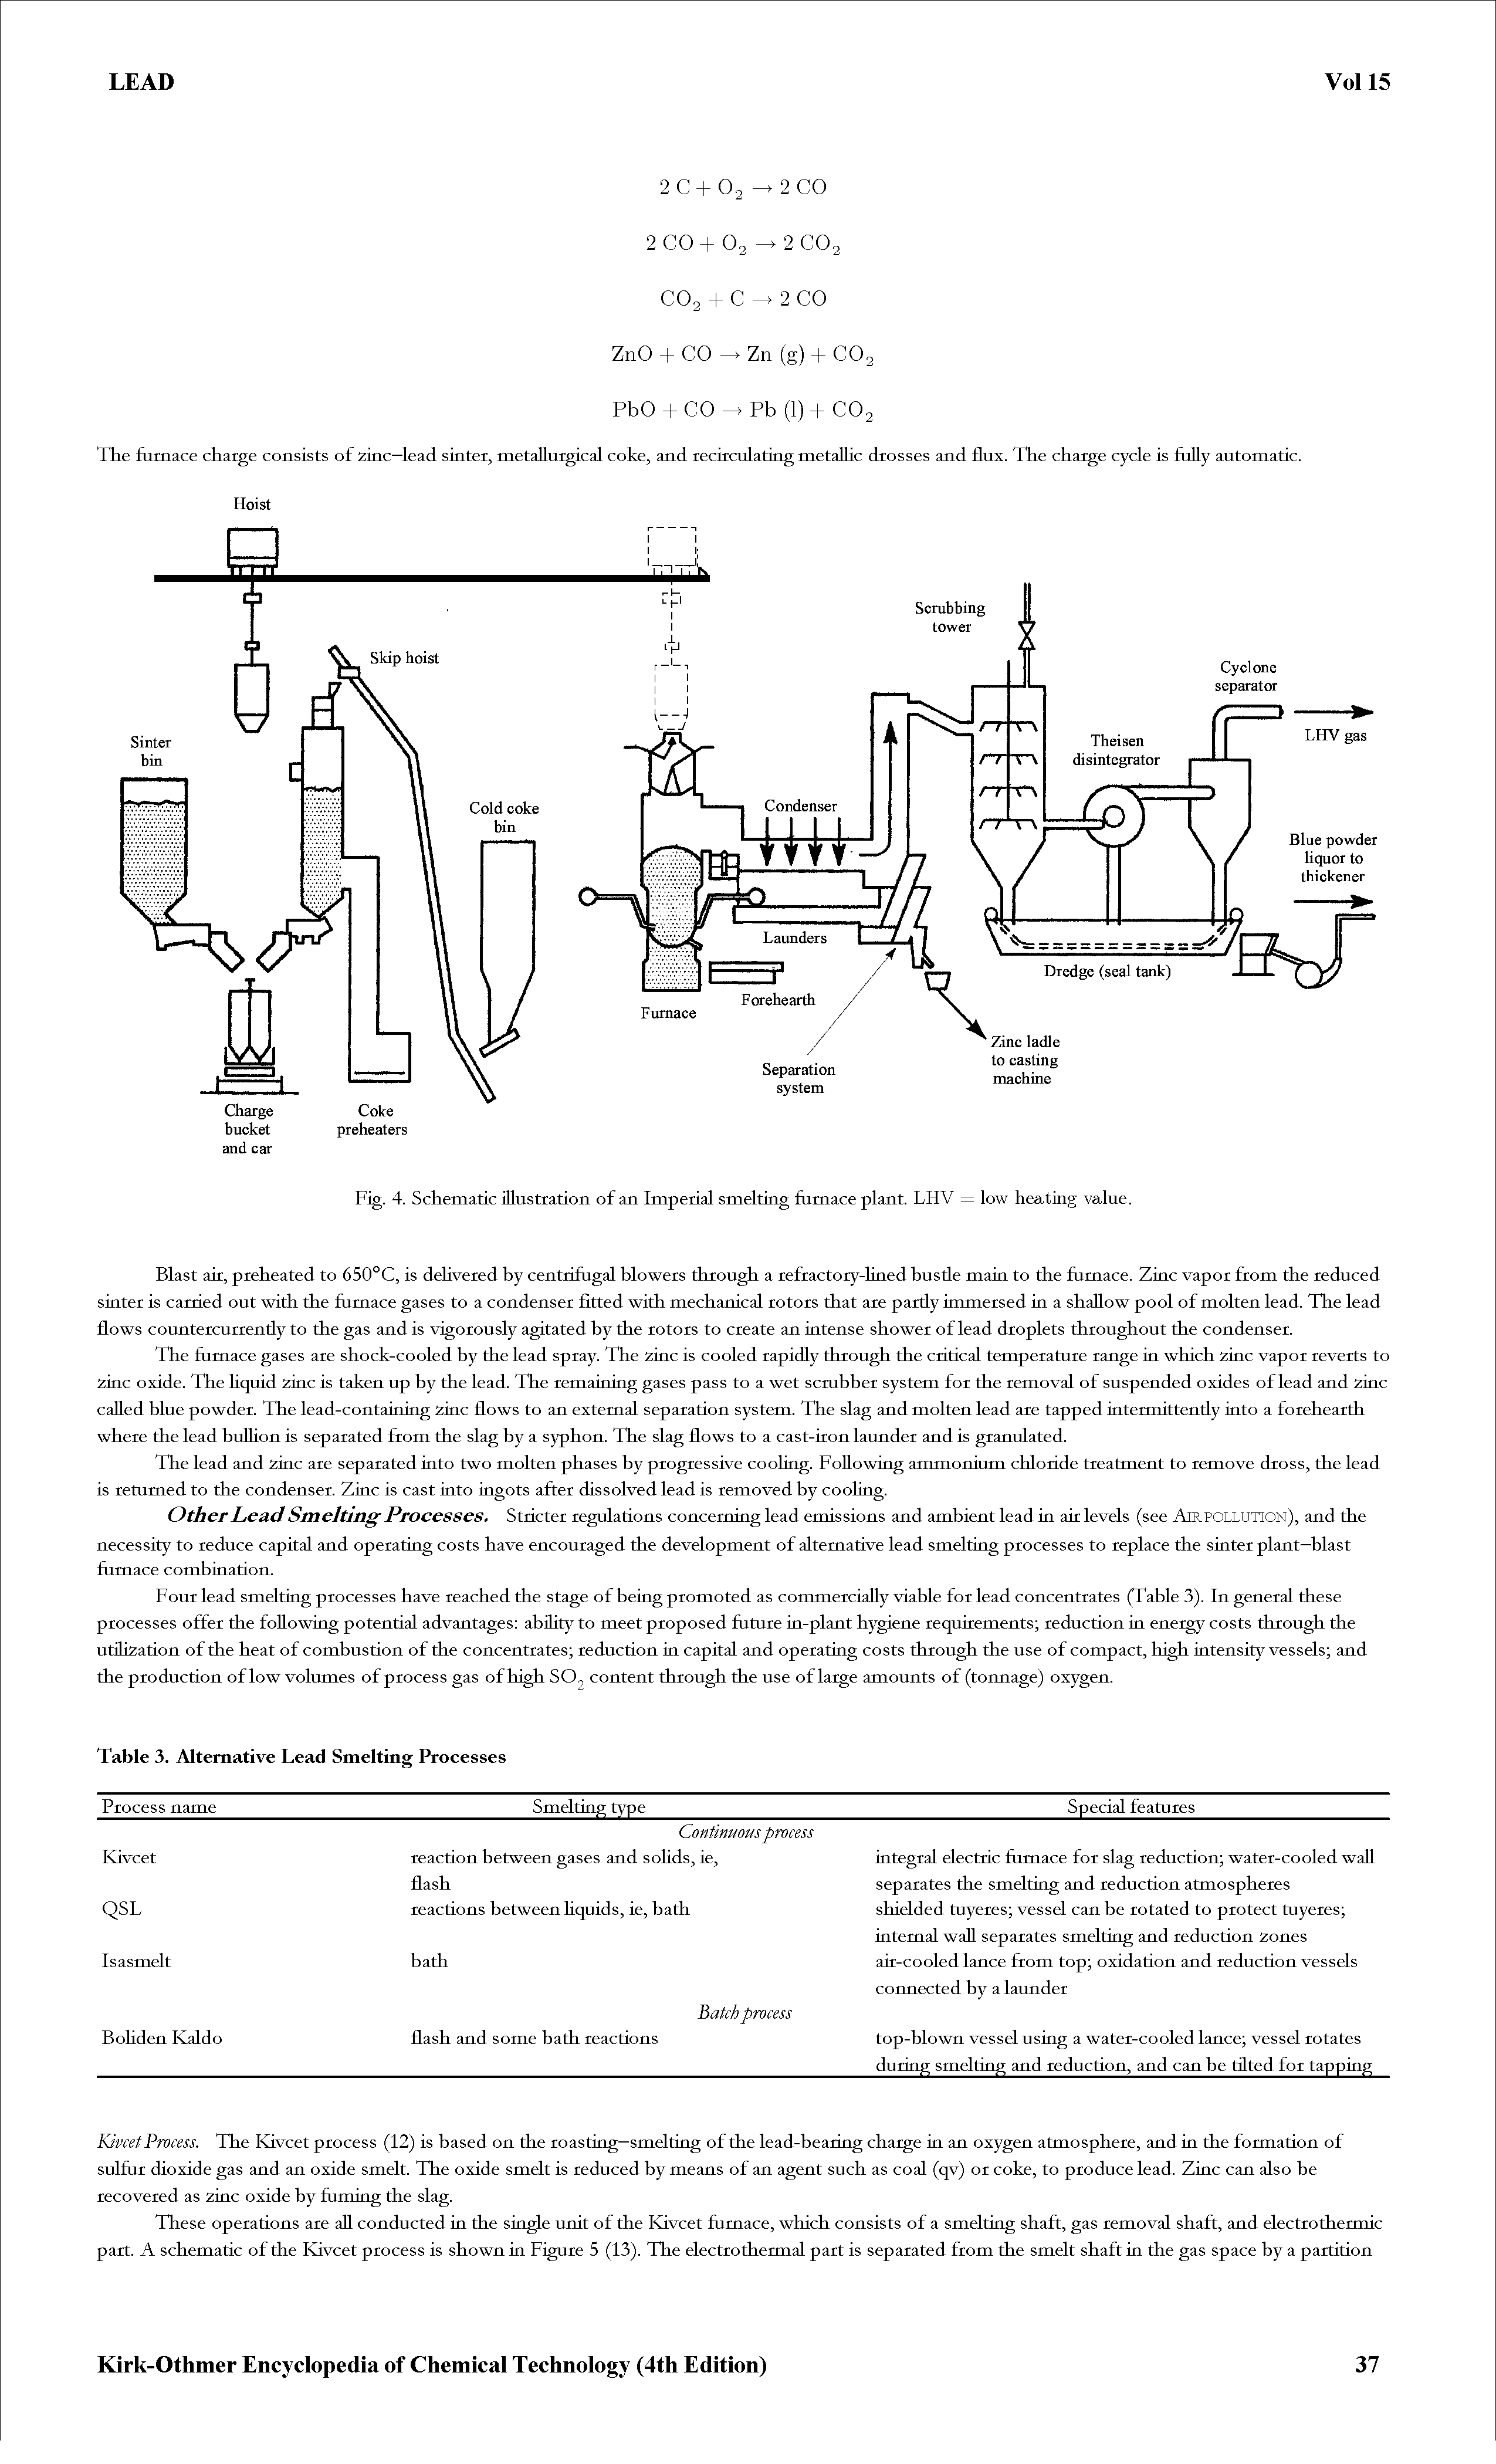 Fig. 4. Schematic illustration of an Imperial smelting furnace plant. LHV = low heating value.